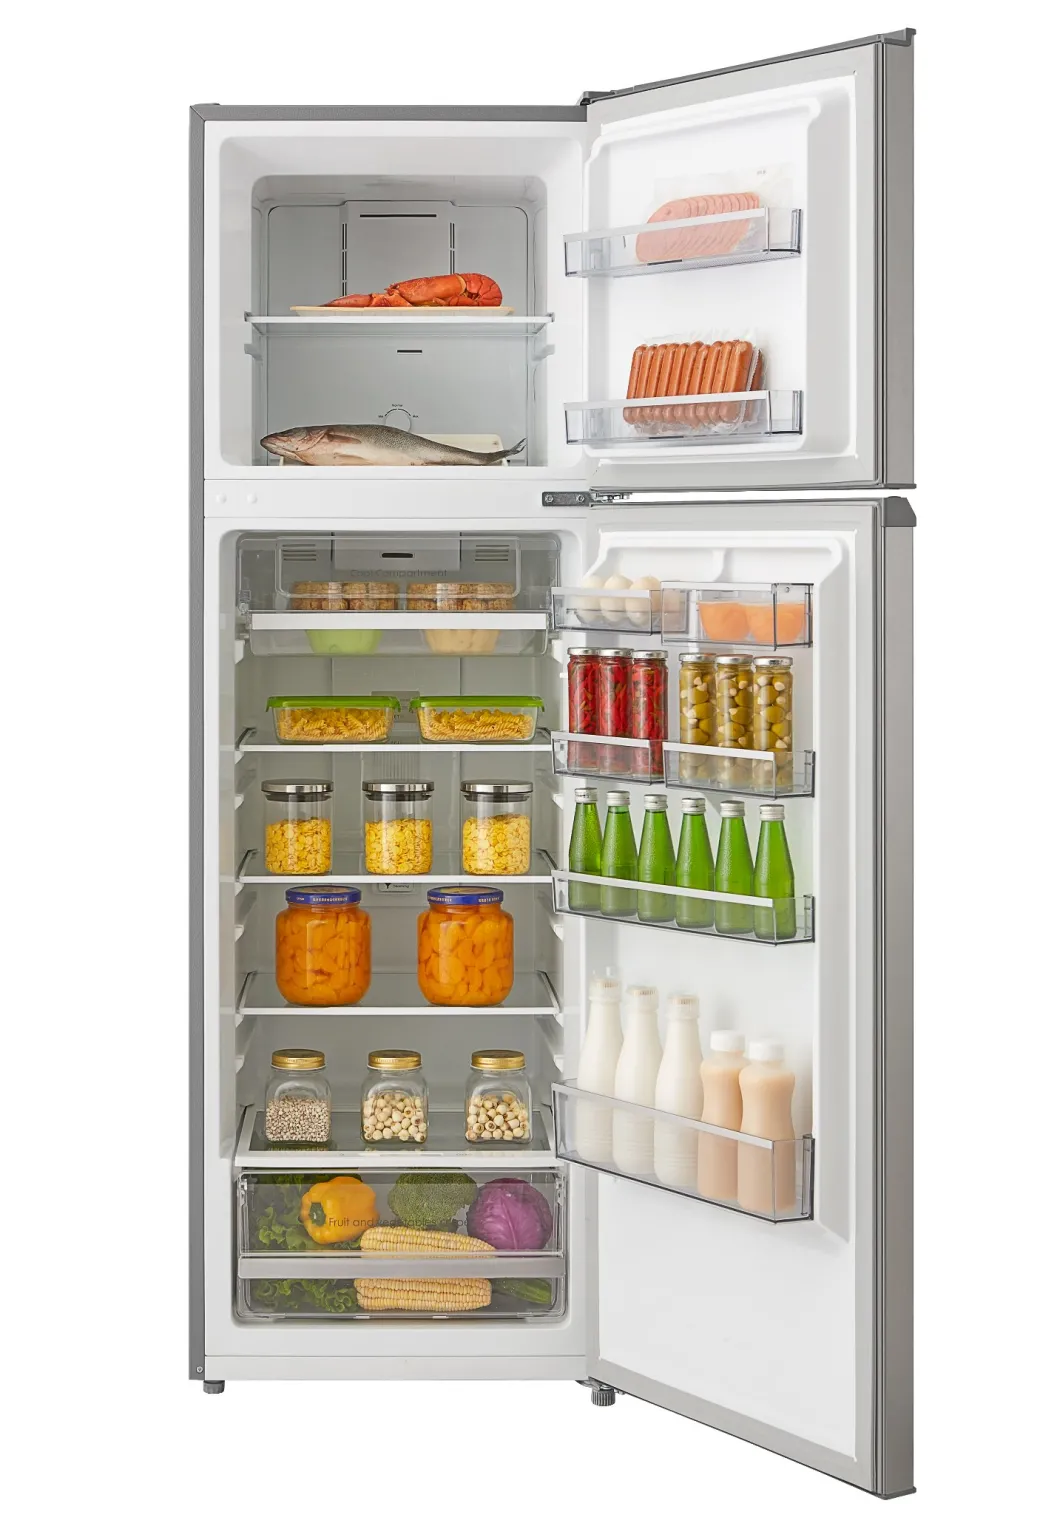 Home Appliance Popular Used Double Door Frost Free Refrigerator